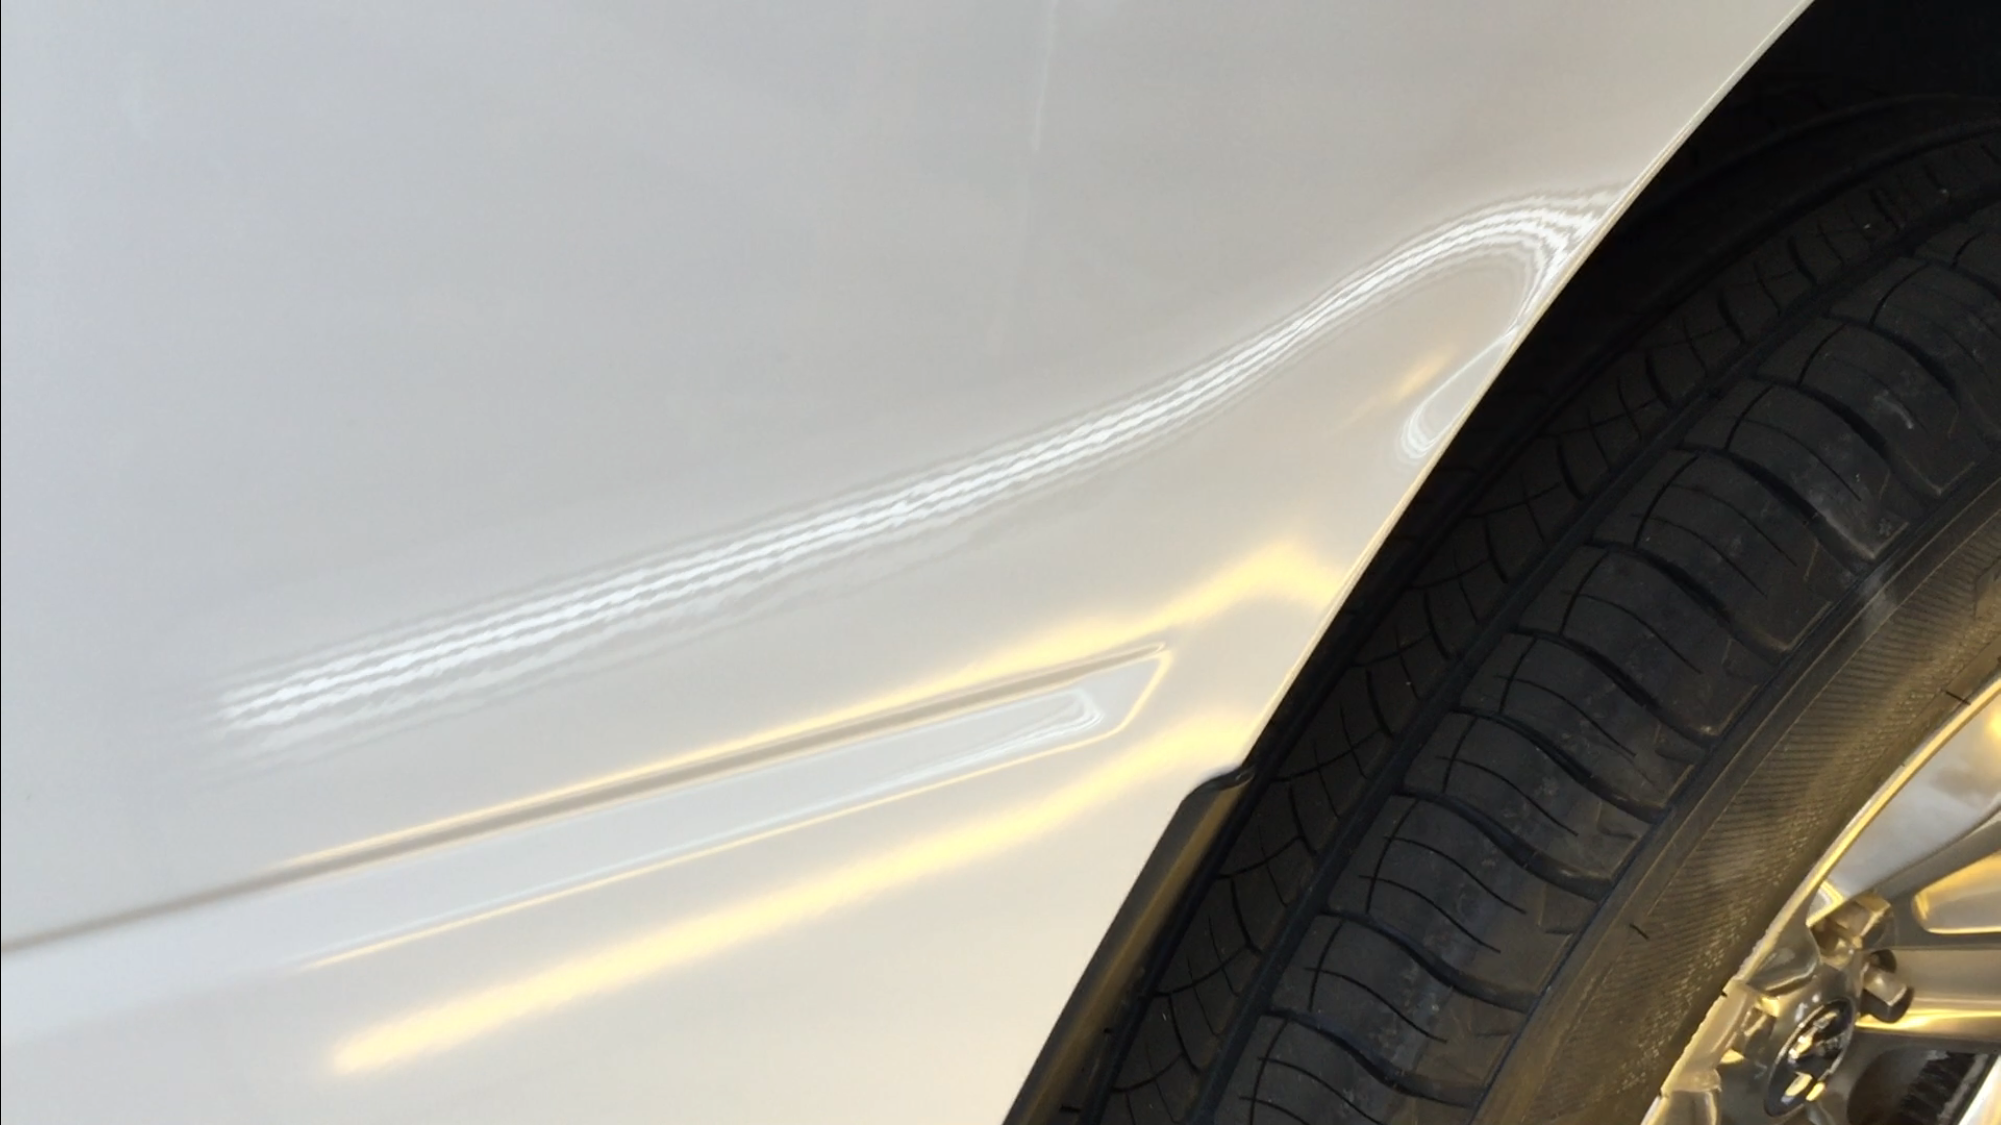 Springfield, IL 2014 Dodge Ram Bedside crease, Paintless Dent Removal, Dent Repair Http://217dent.com